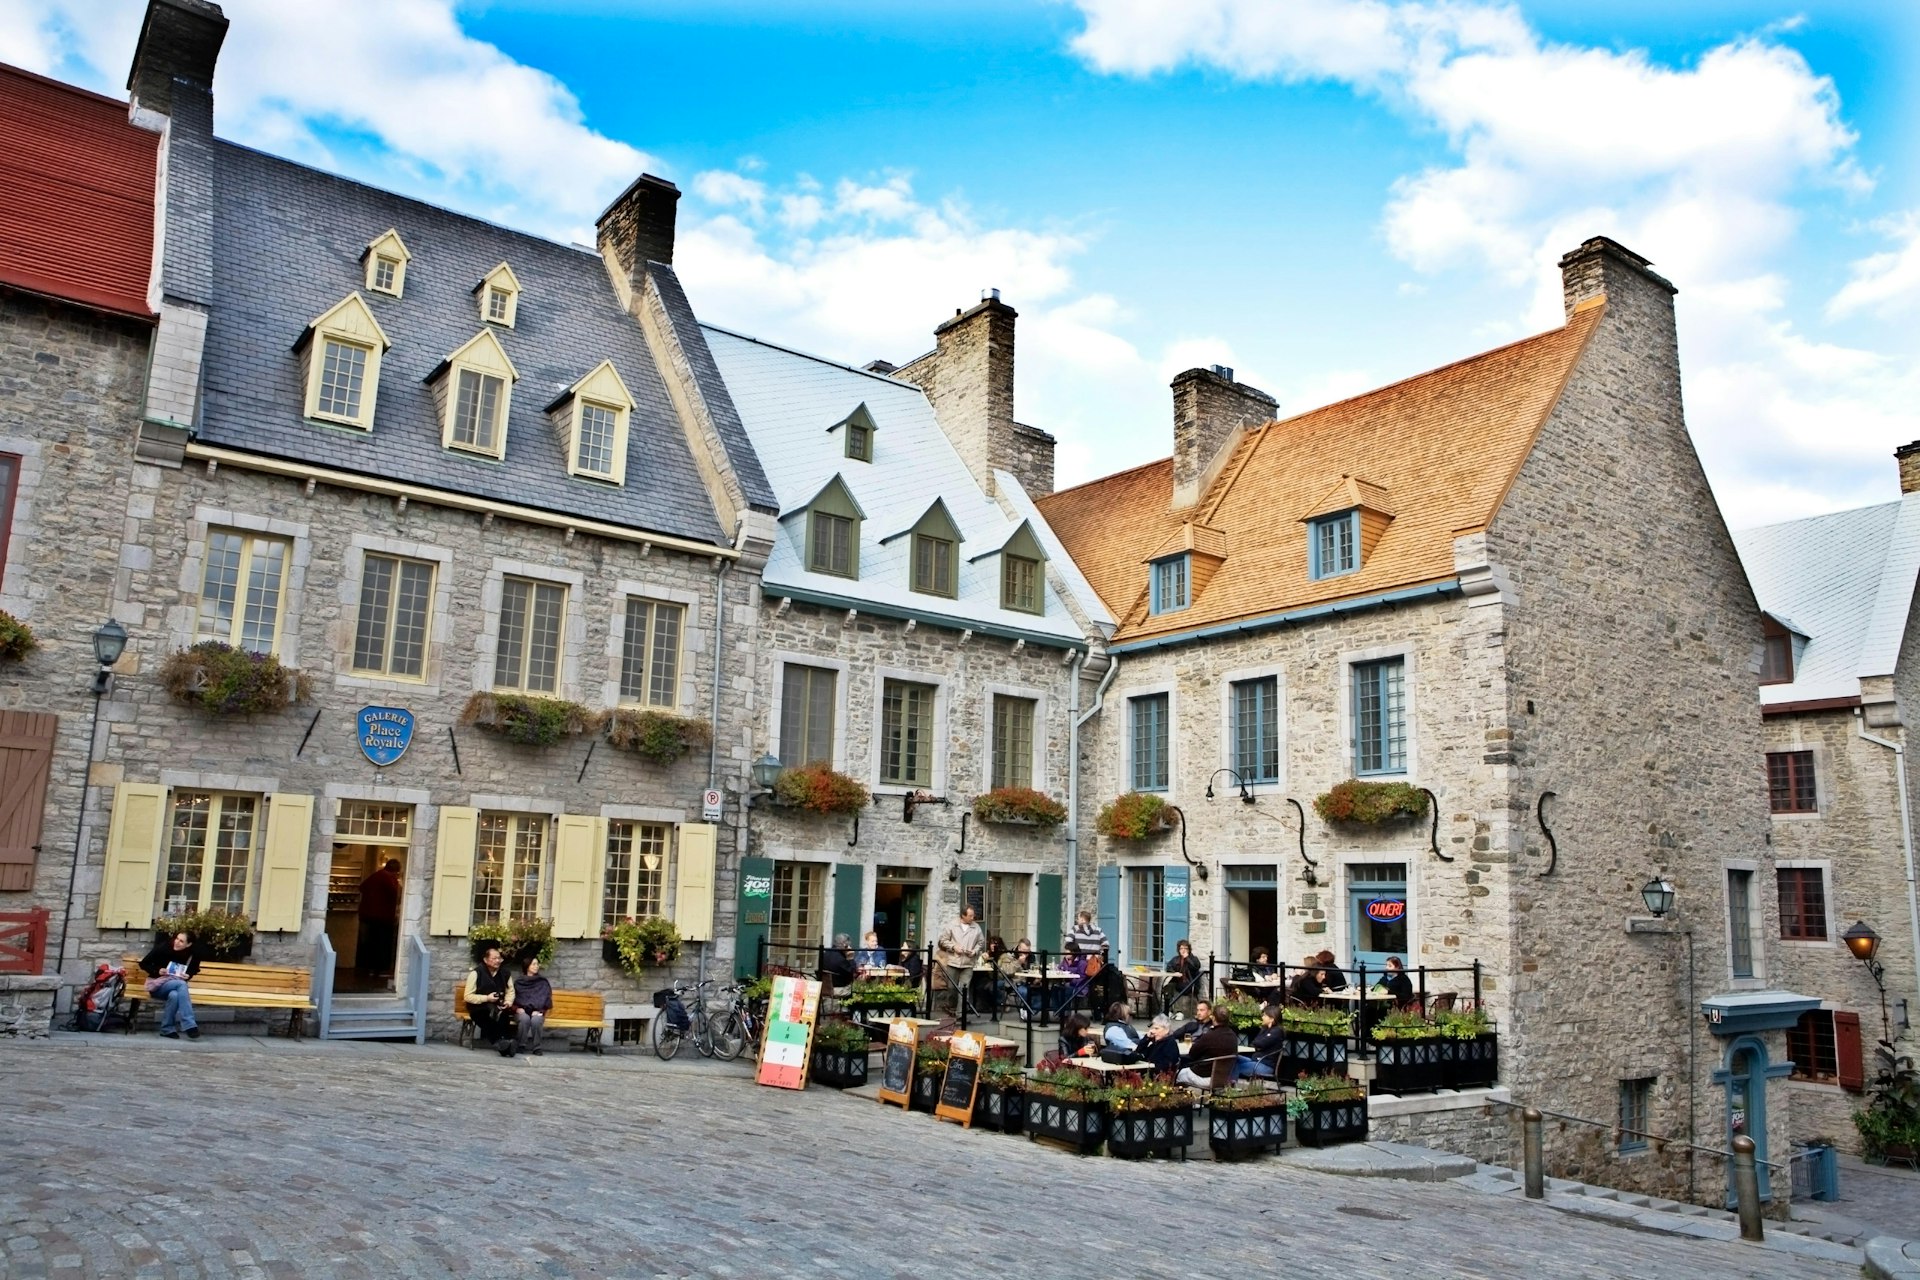 In 1608 Samuel de Champlain founded Quebec City in the area that would later become Old Québec. Image by Klaus Lang / Getty